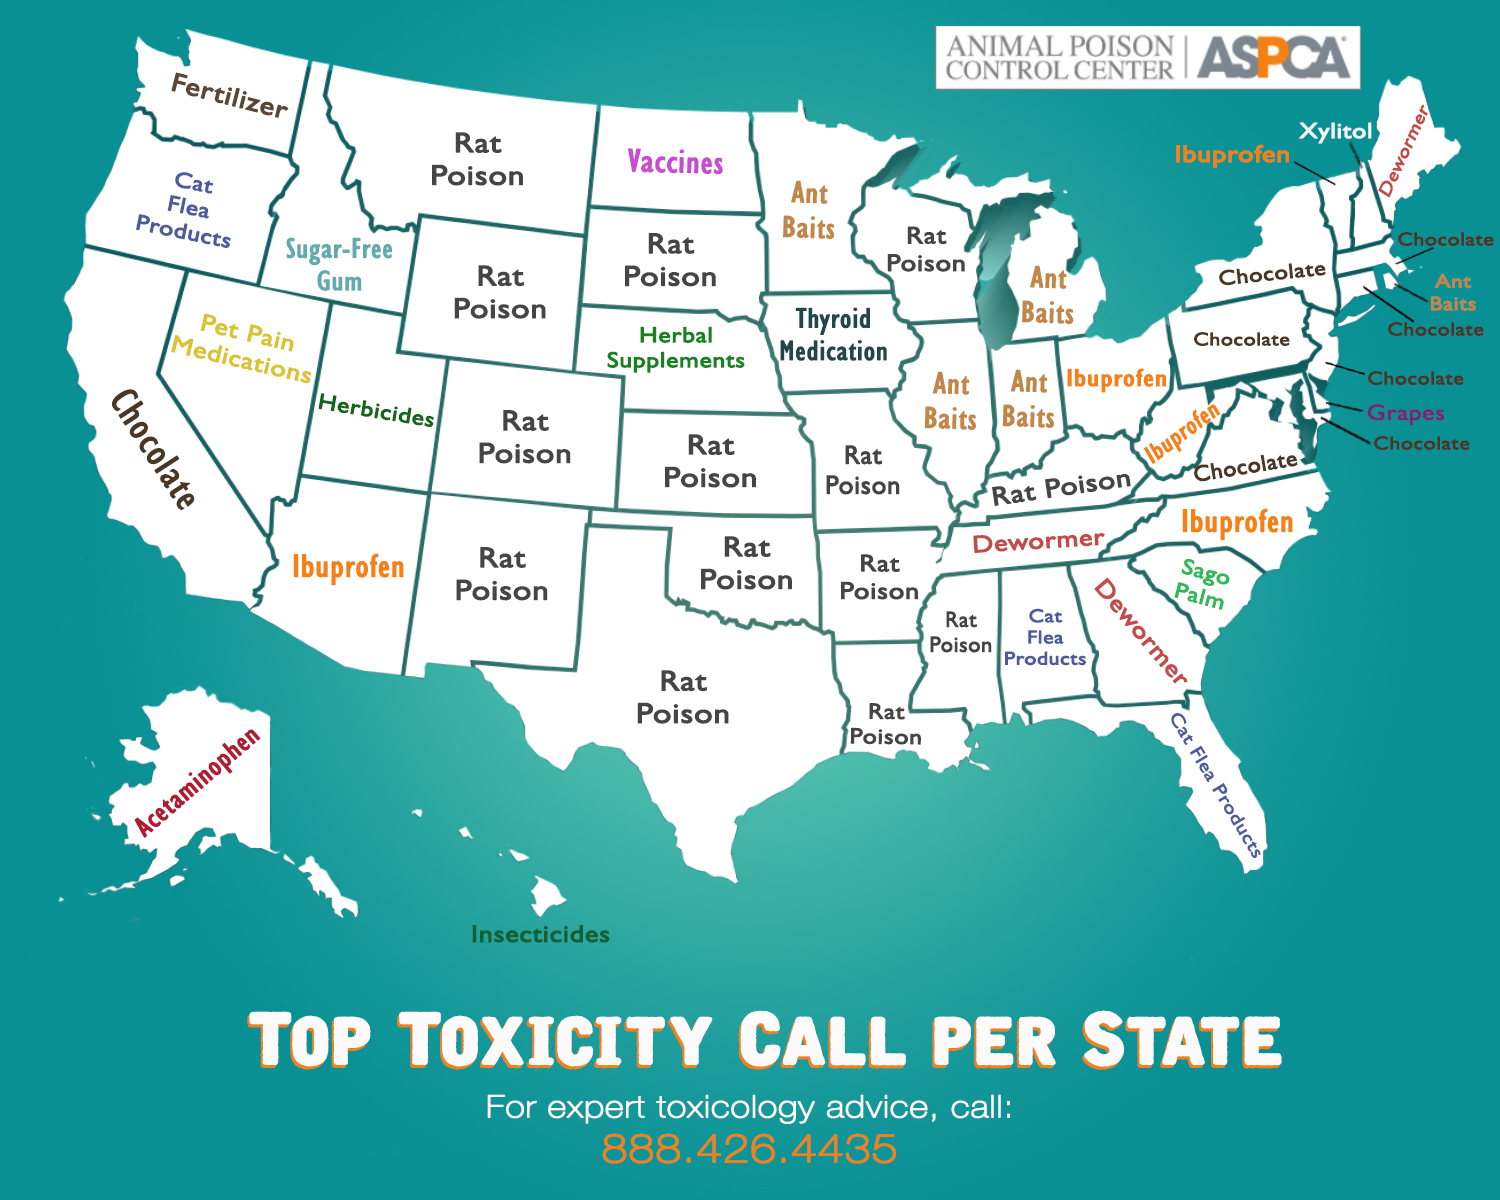 What S The Top Pet Toxin In Your State The Aspca Animal Poison Control Center Shares Its Most Frequent Call Topics Aspca